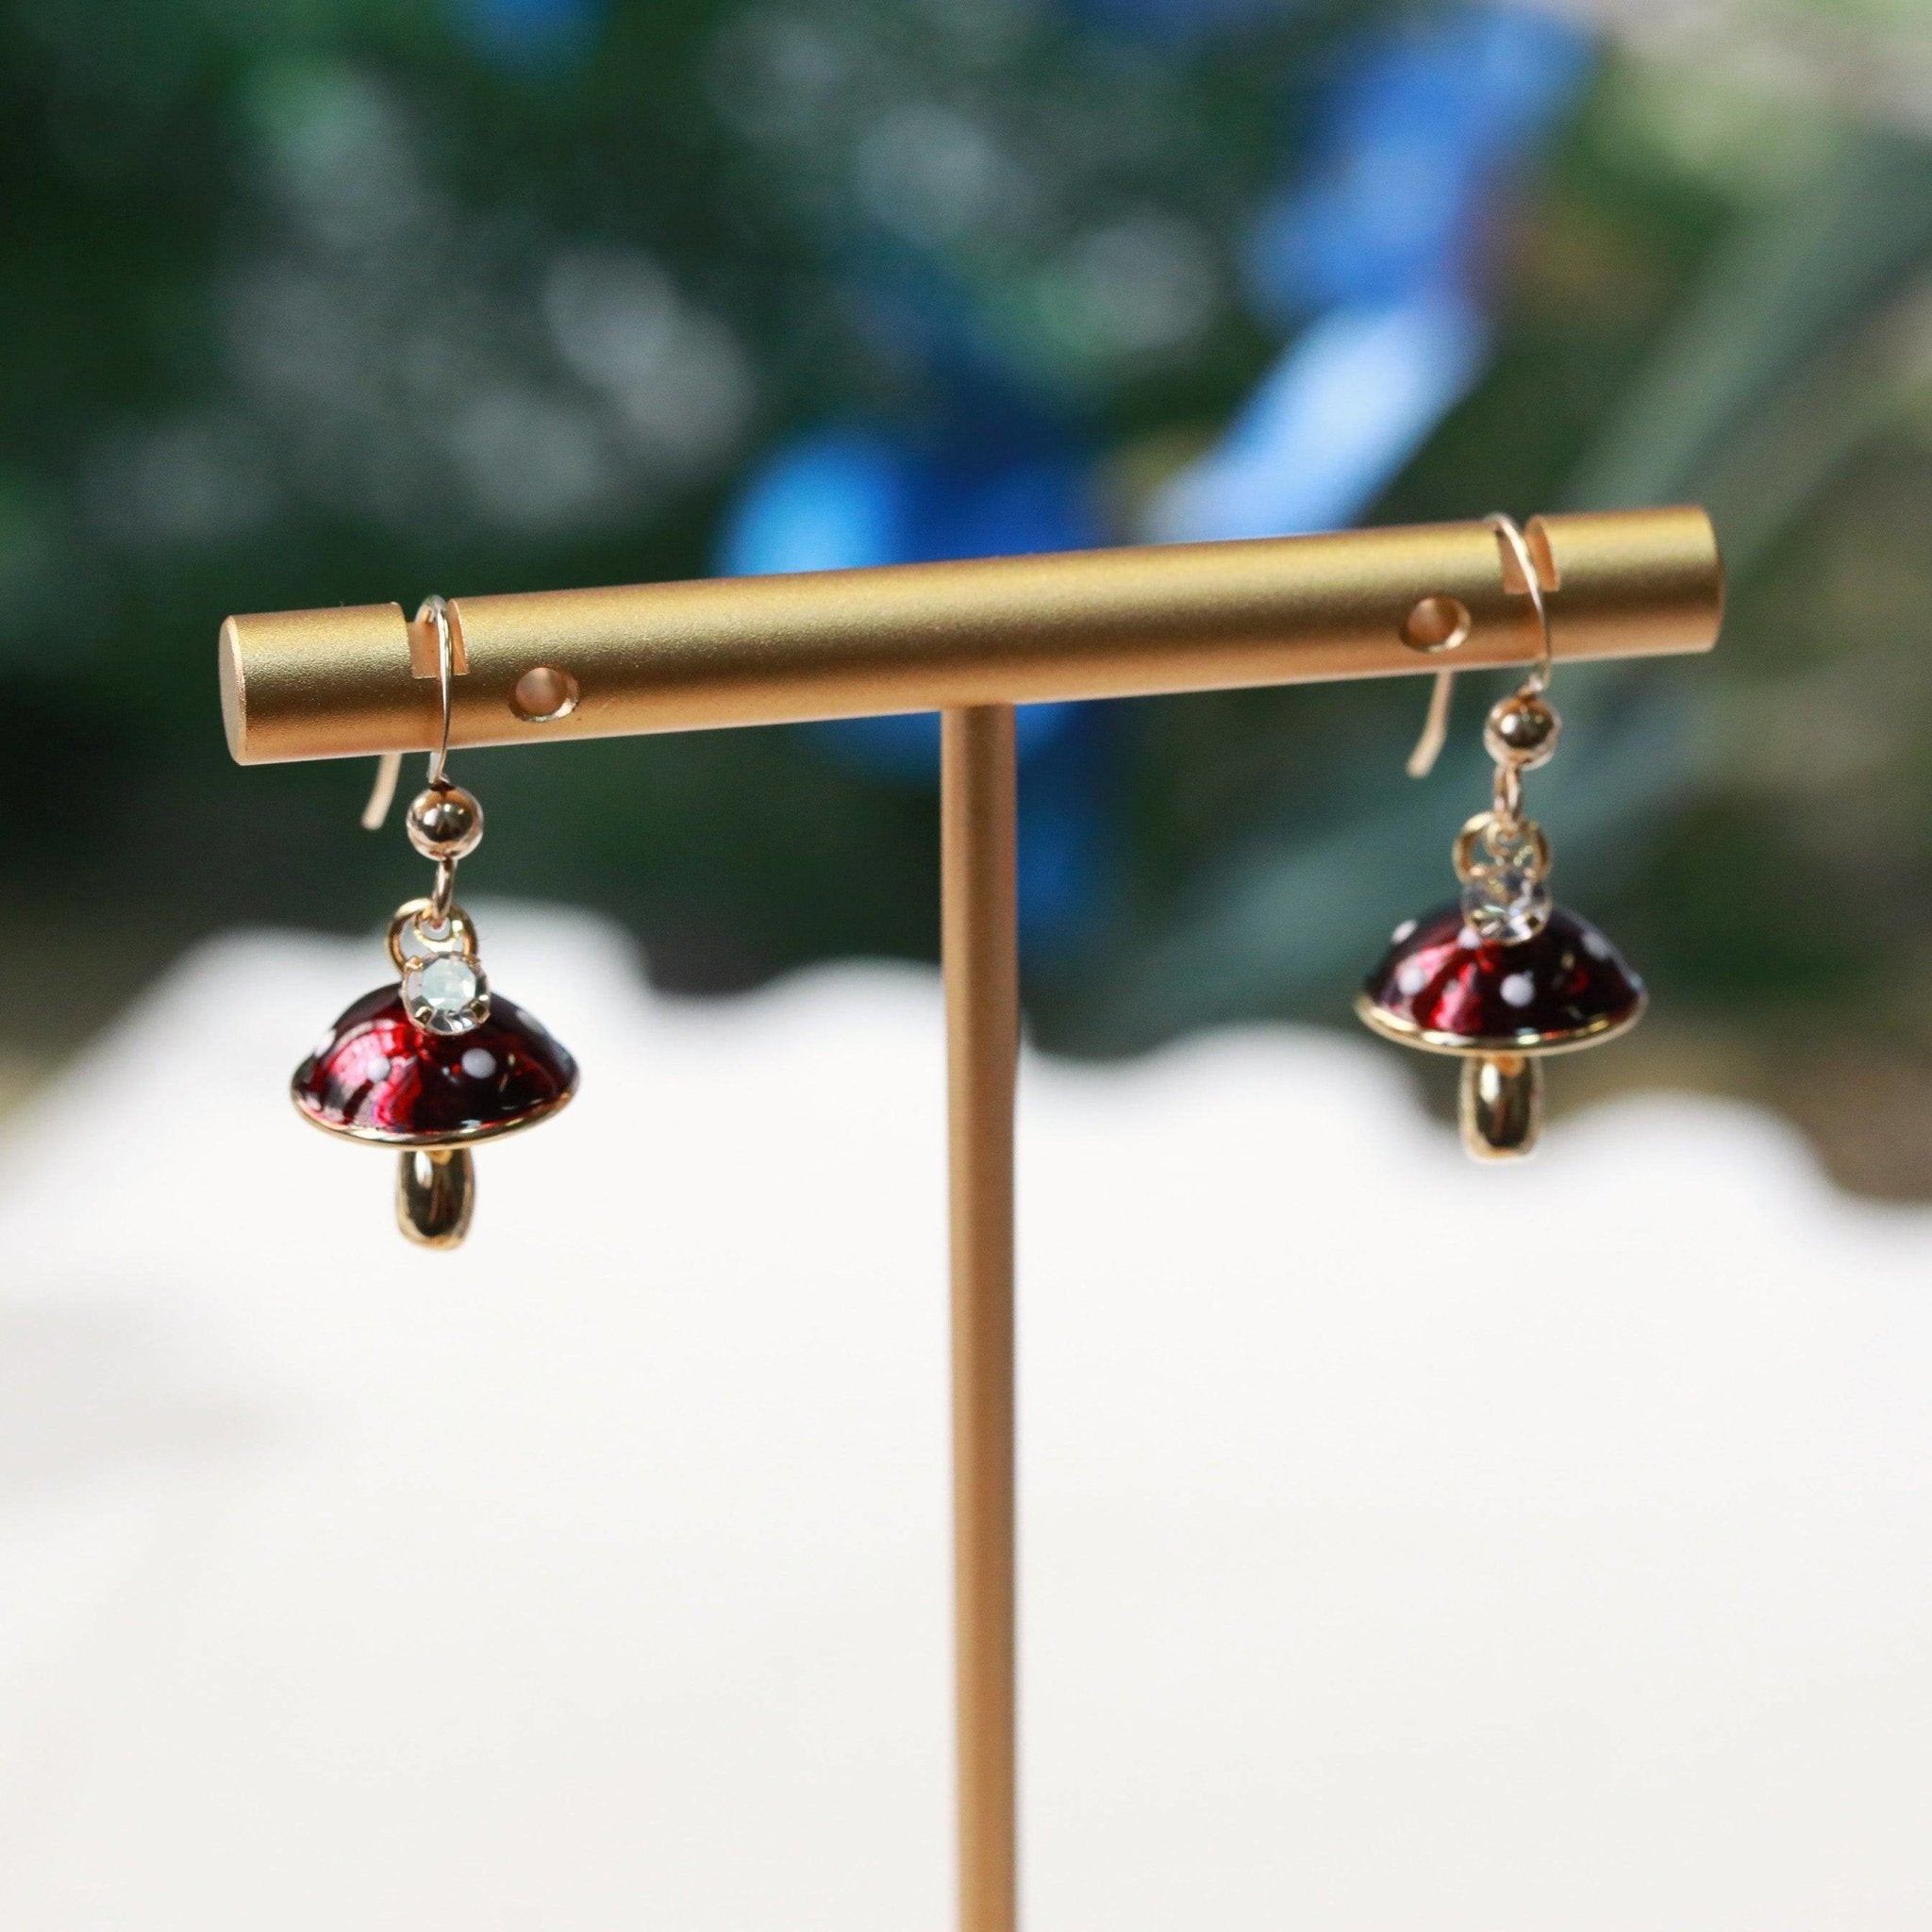 tiny mushroom charm earrings in red with white dots on 14kt gold filled earring hooks with tiny crystal charms